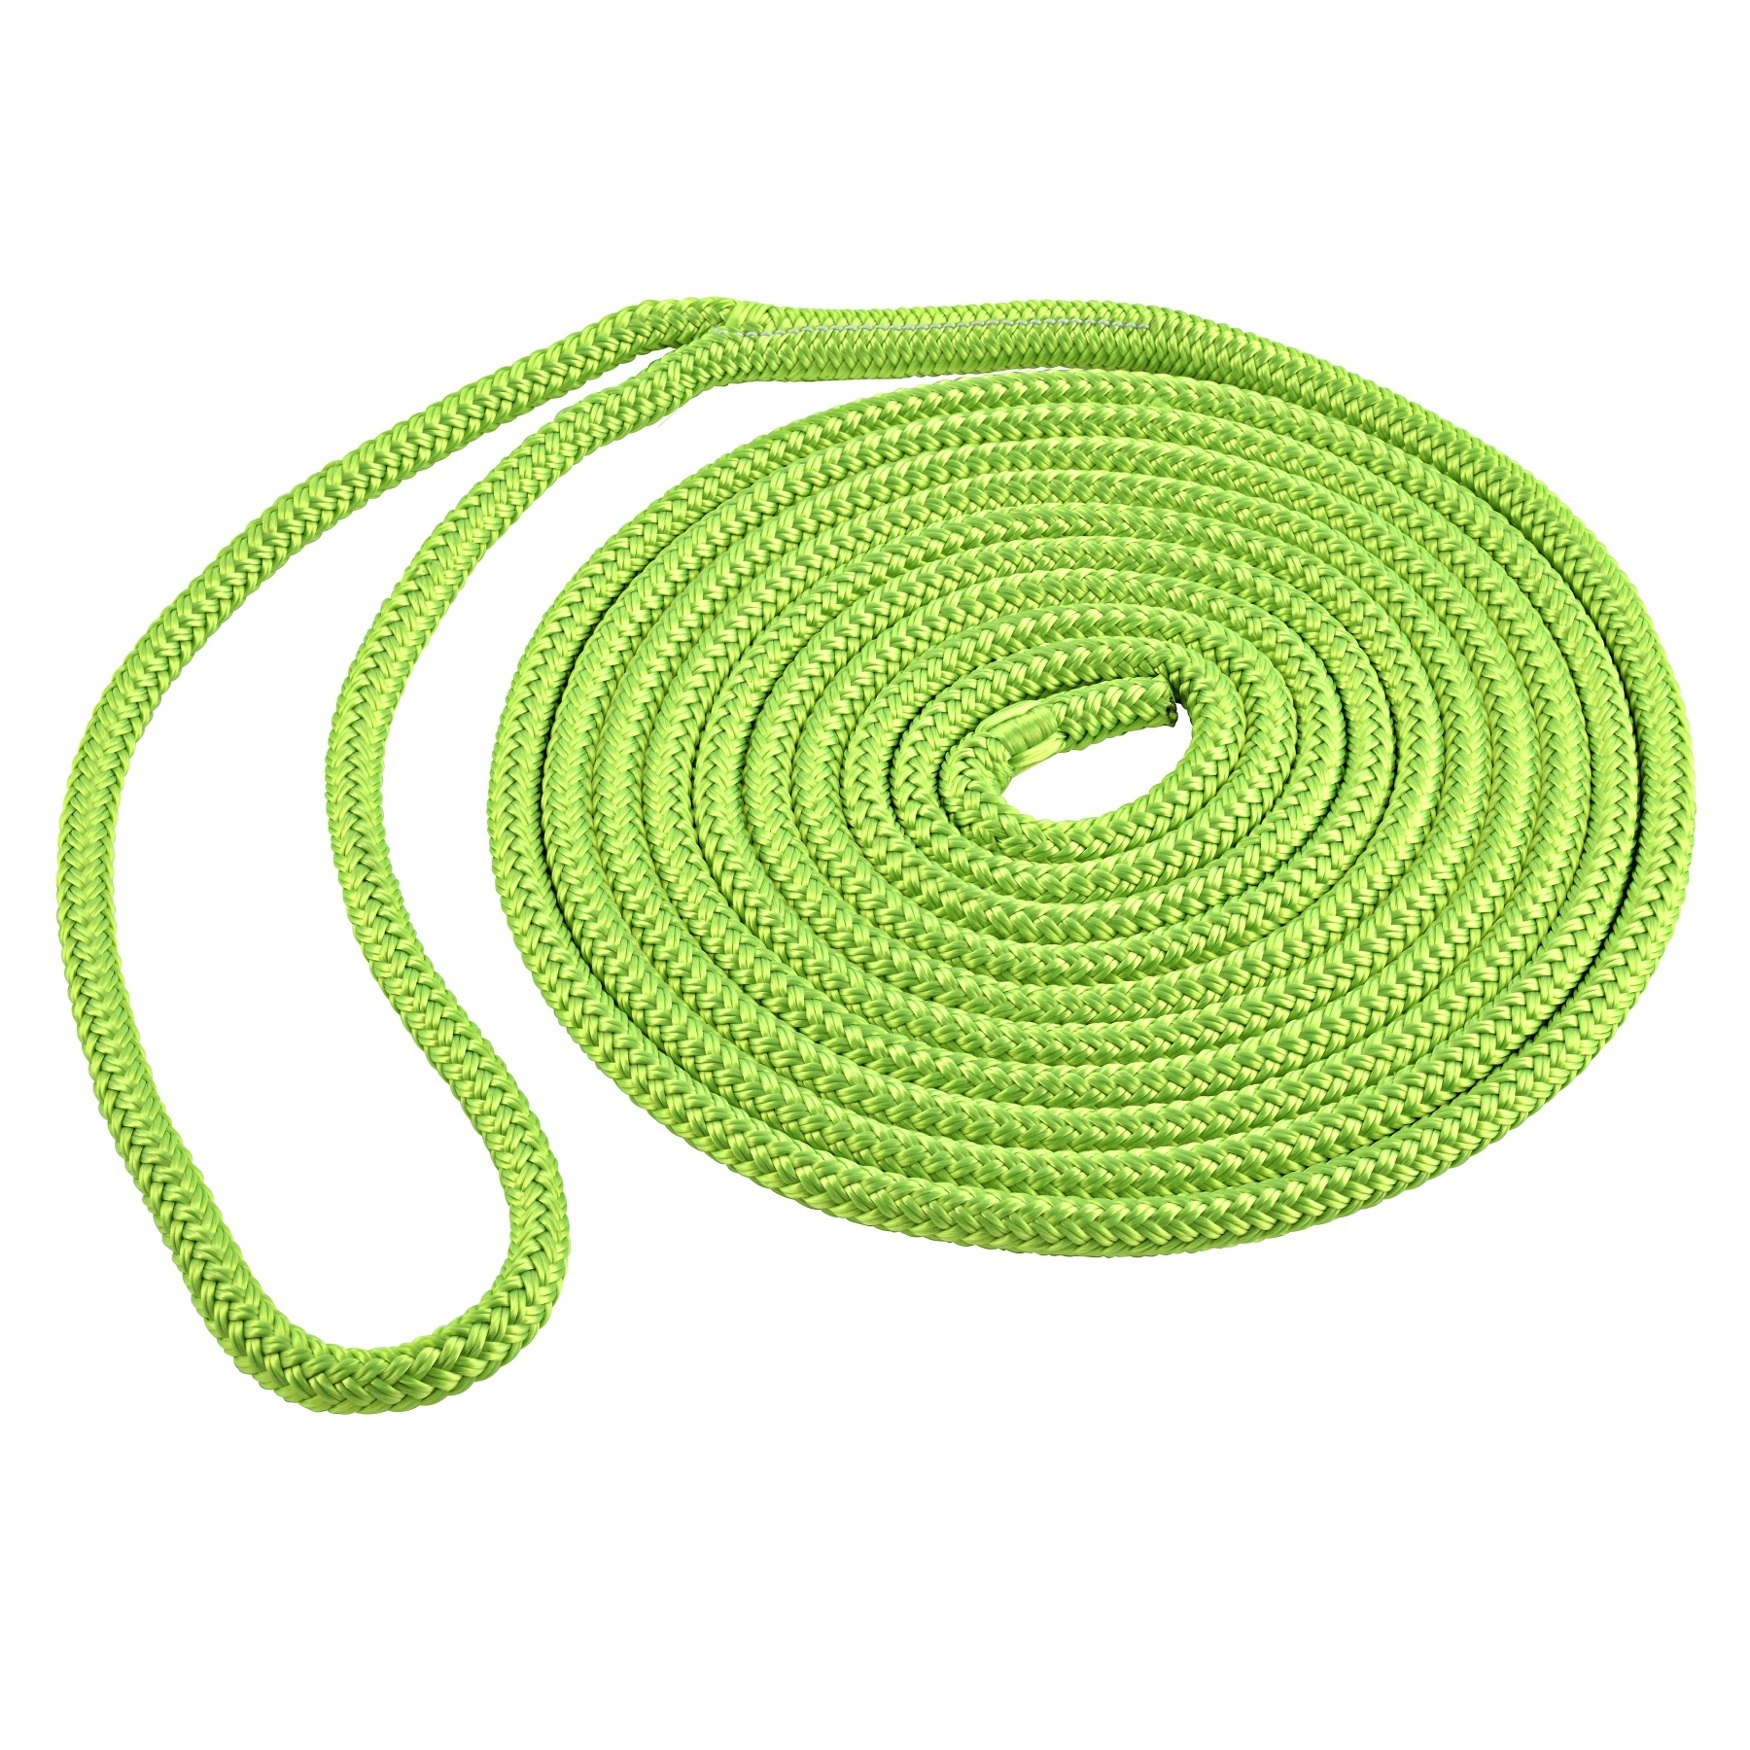 Shoreline Marine Double Braided Polyester, 1/2 in x 15 ft, Neon Green - image 1 of 5